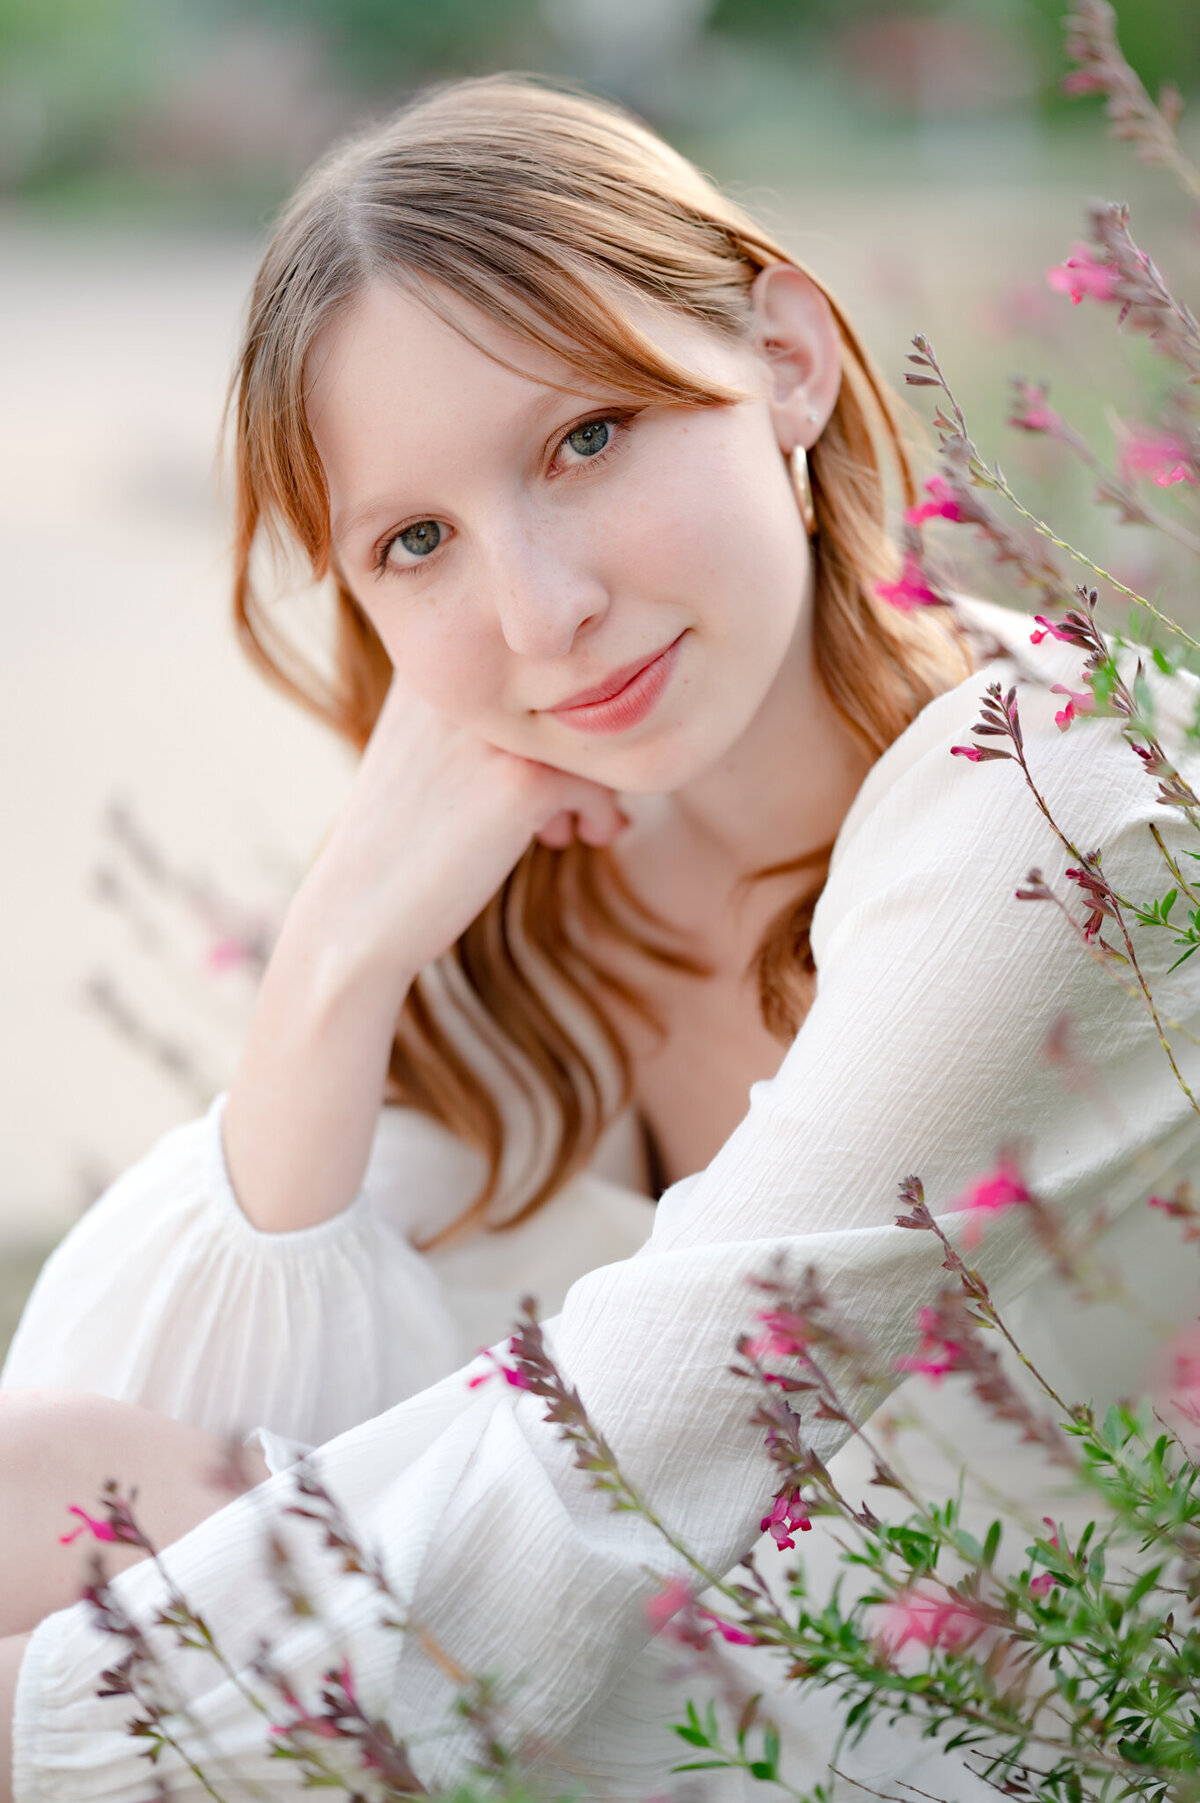 Senior picture of a red-headed girl in a white dress sitting among pink flowers.